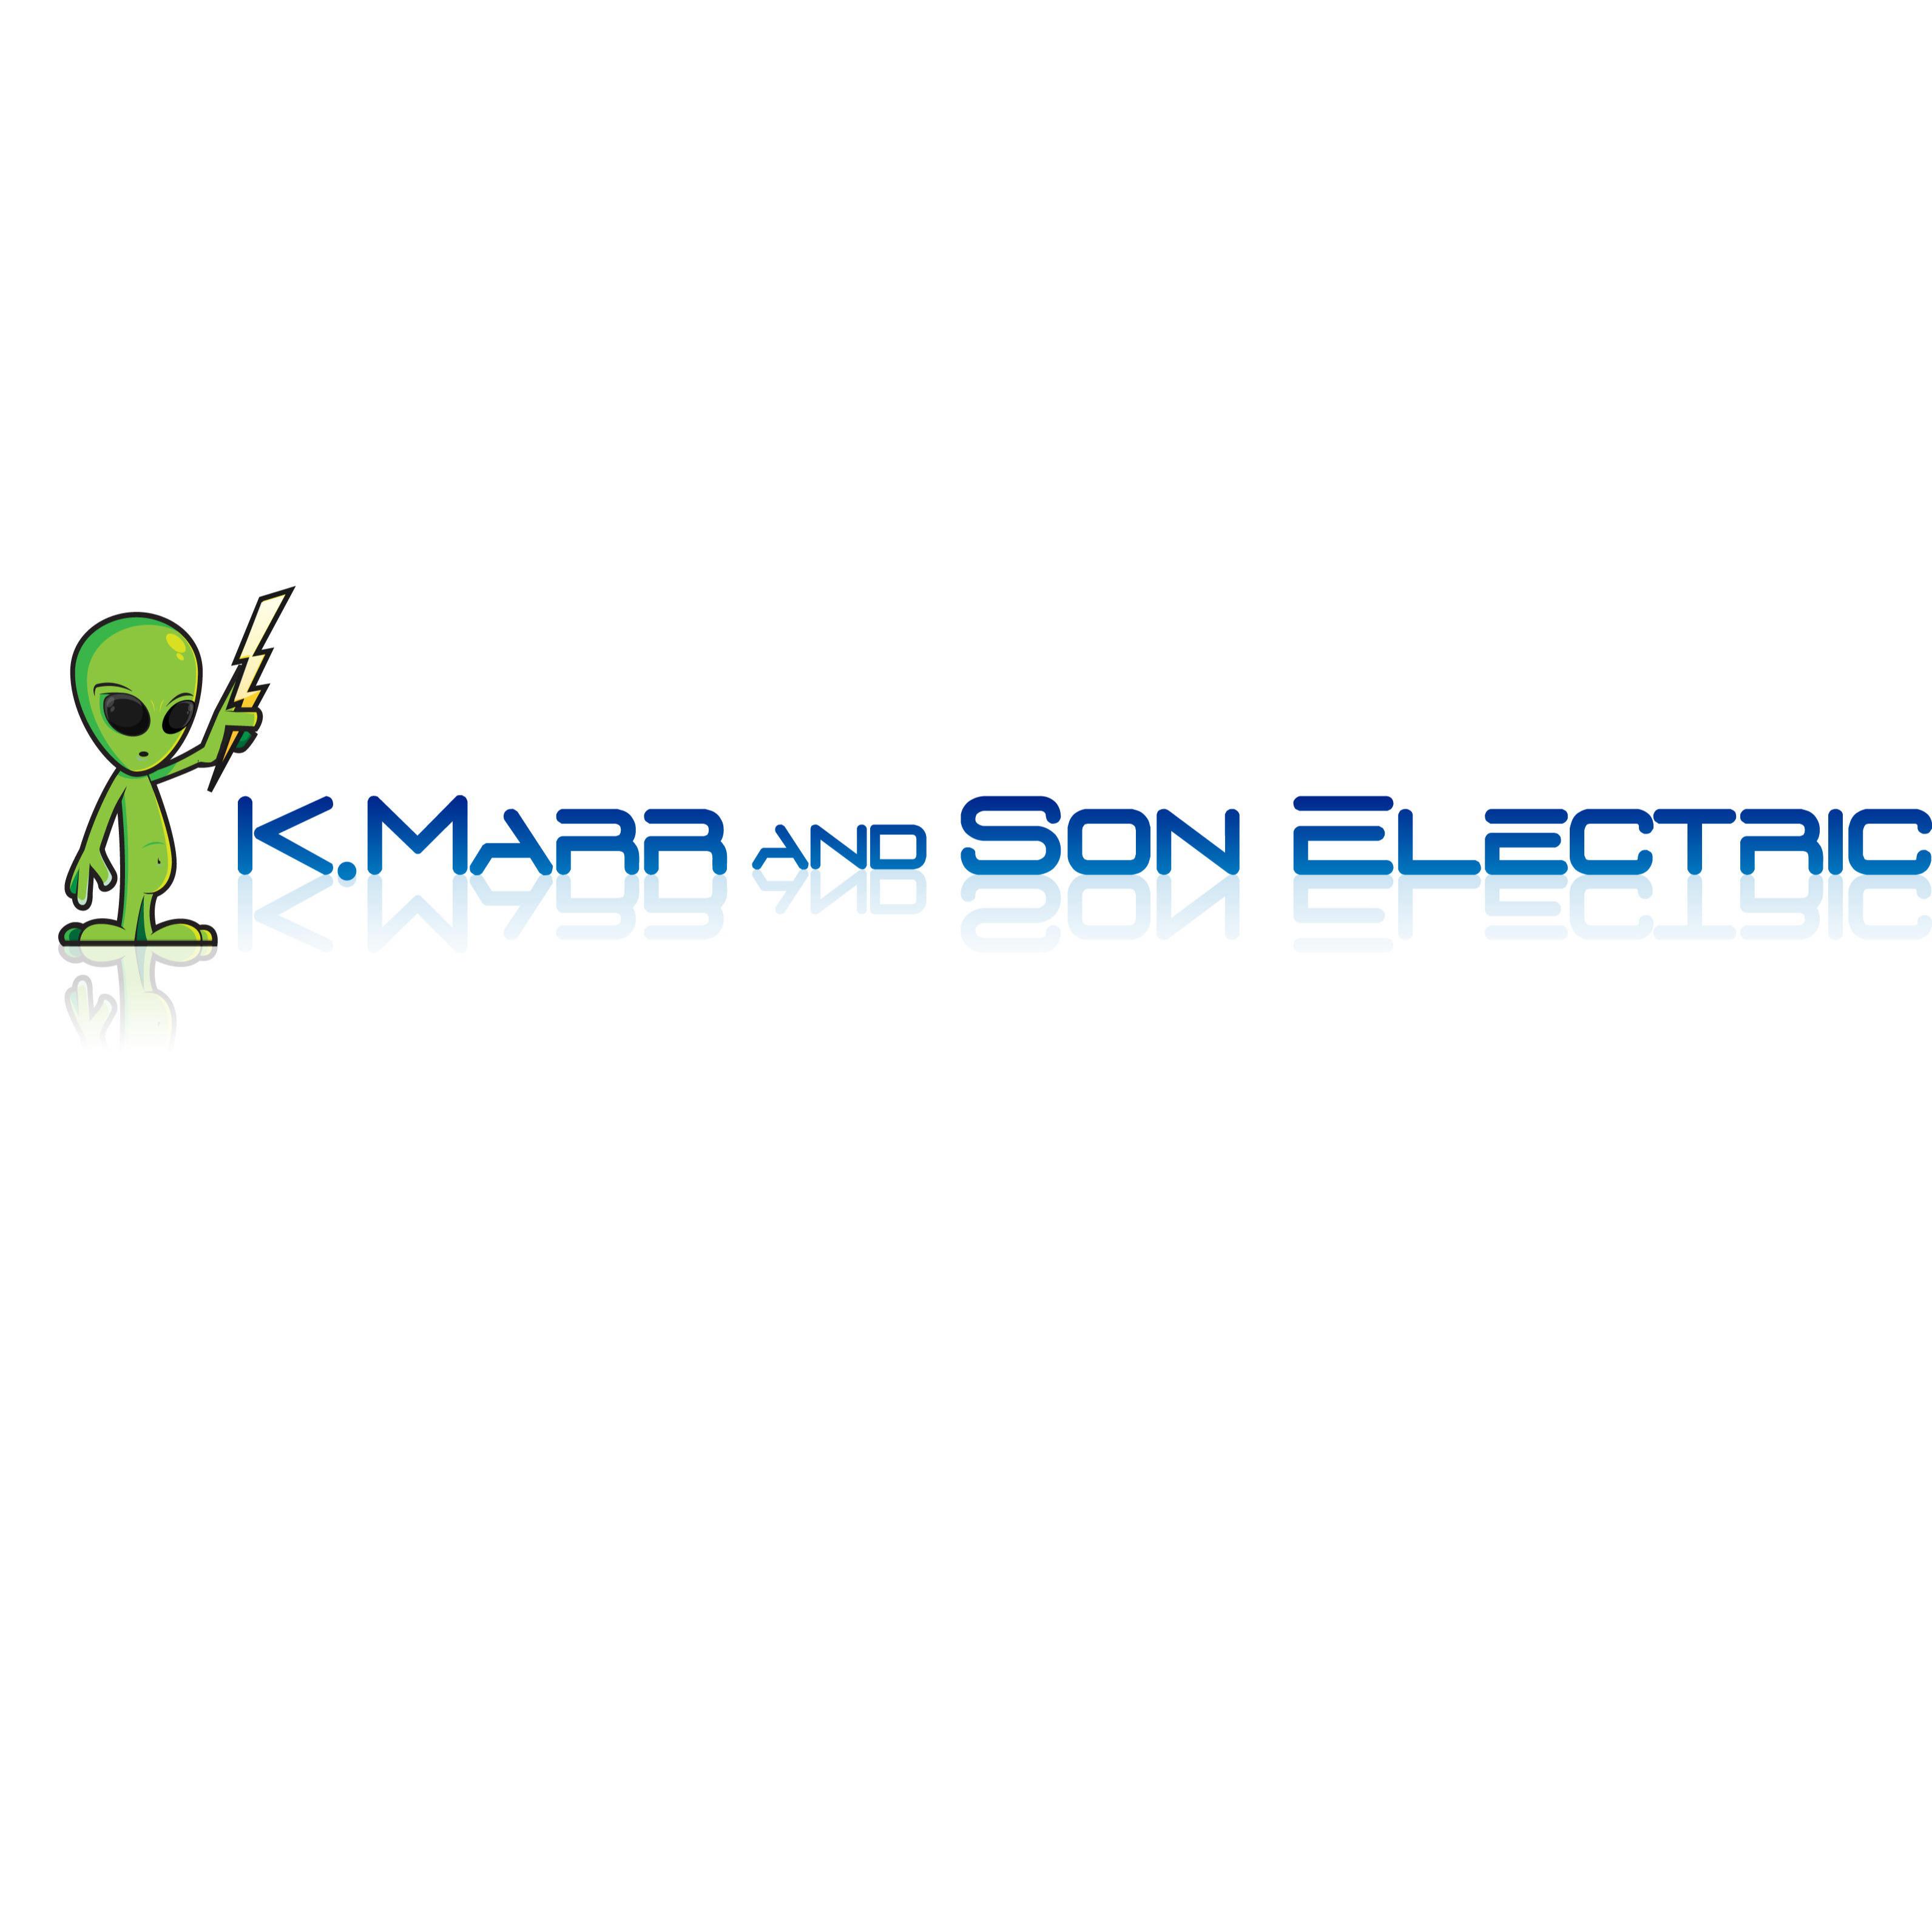 K.MARR AND SON ELECTRIC Crystal Beach